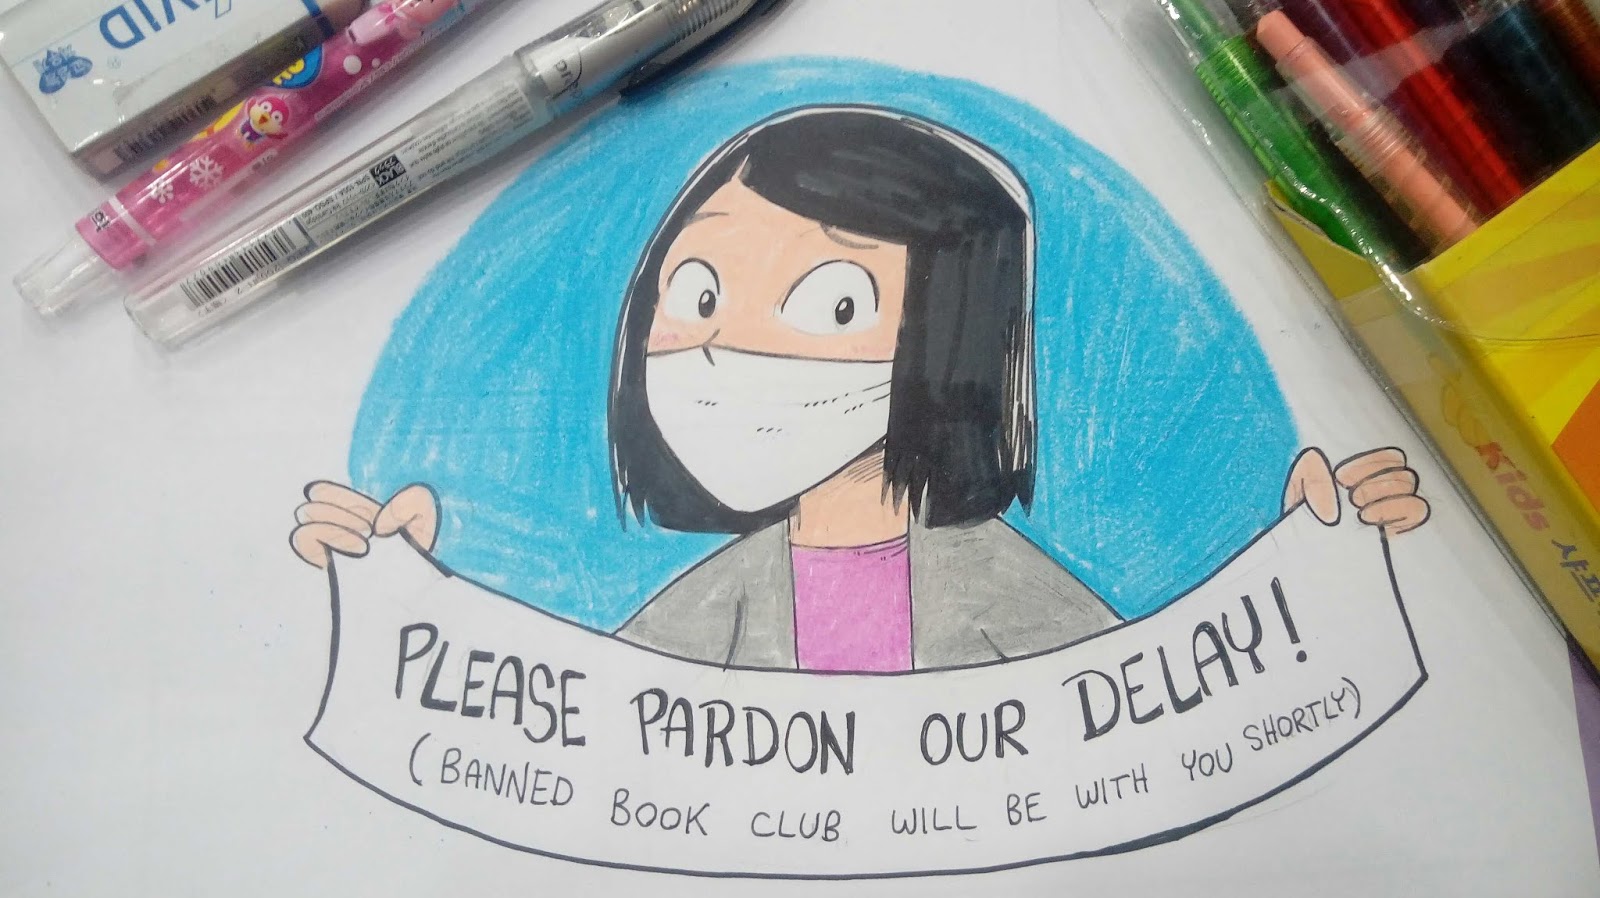 Banned Book Clubs delay graphic by Eric Estrada